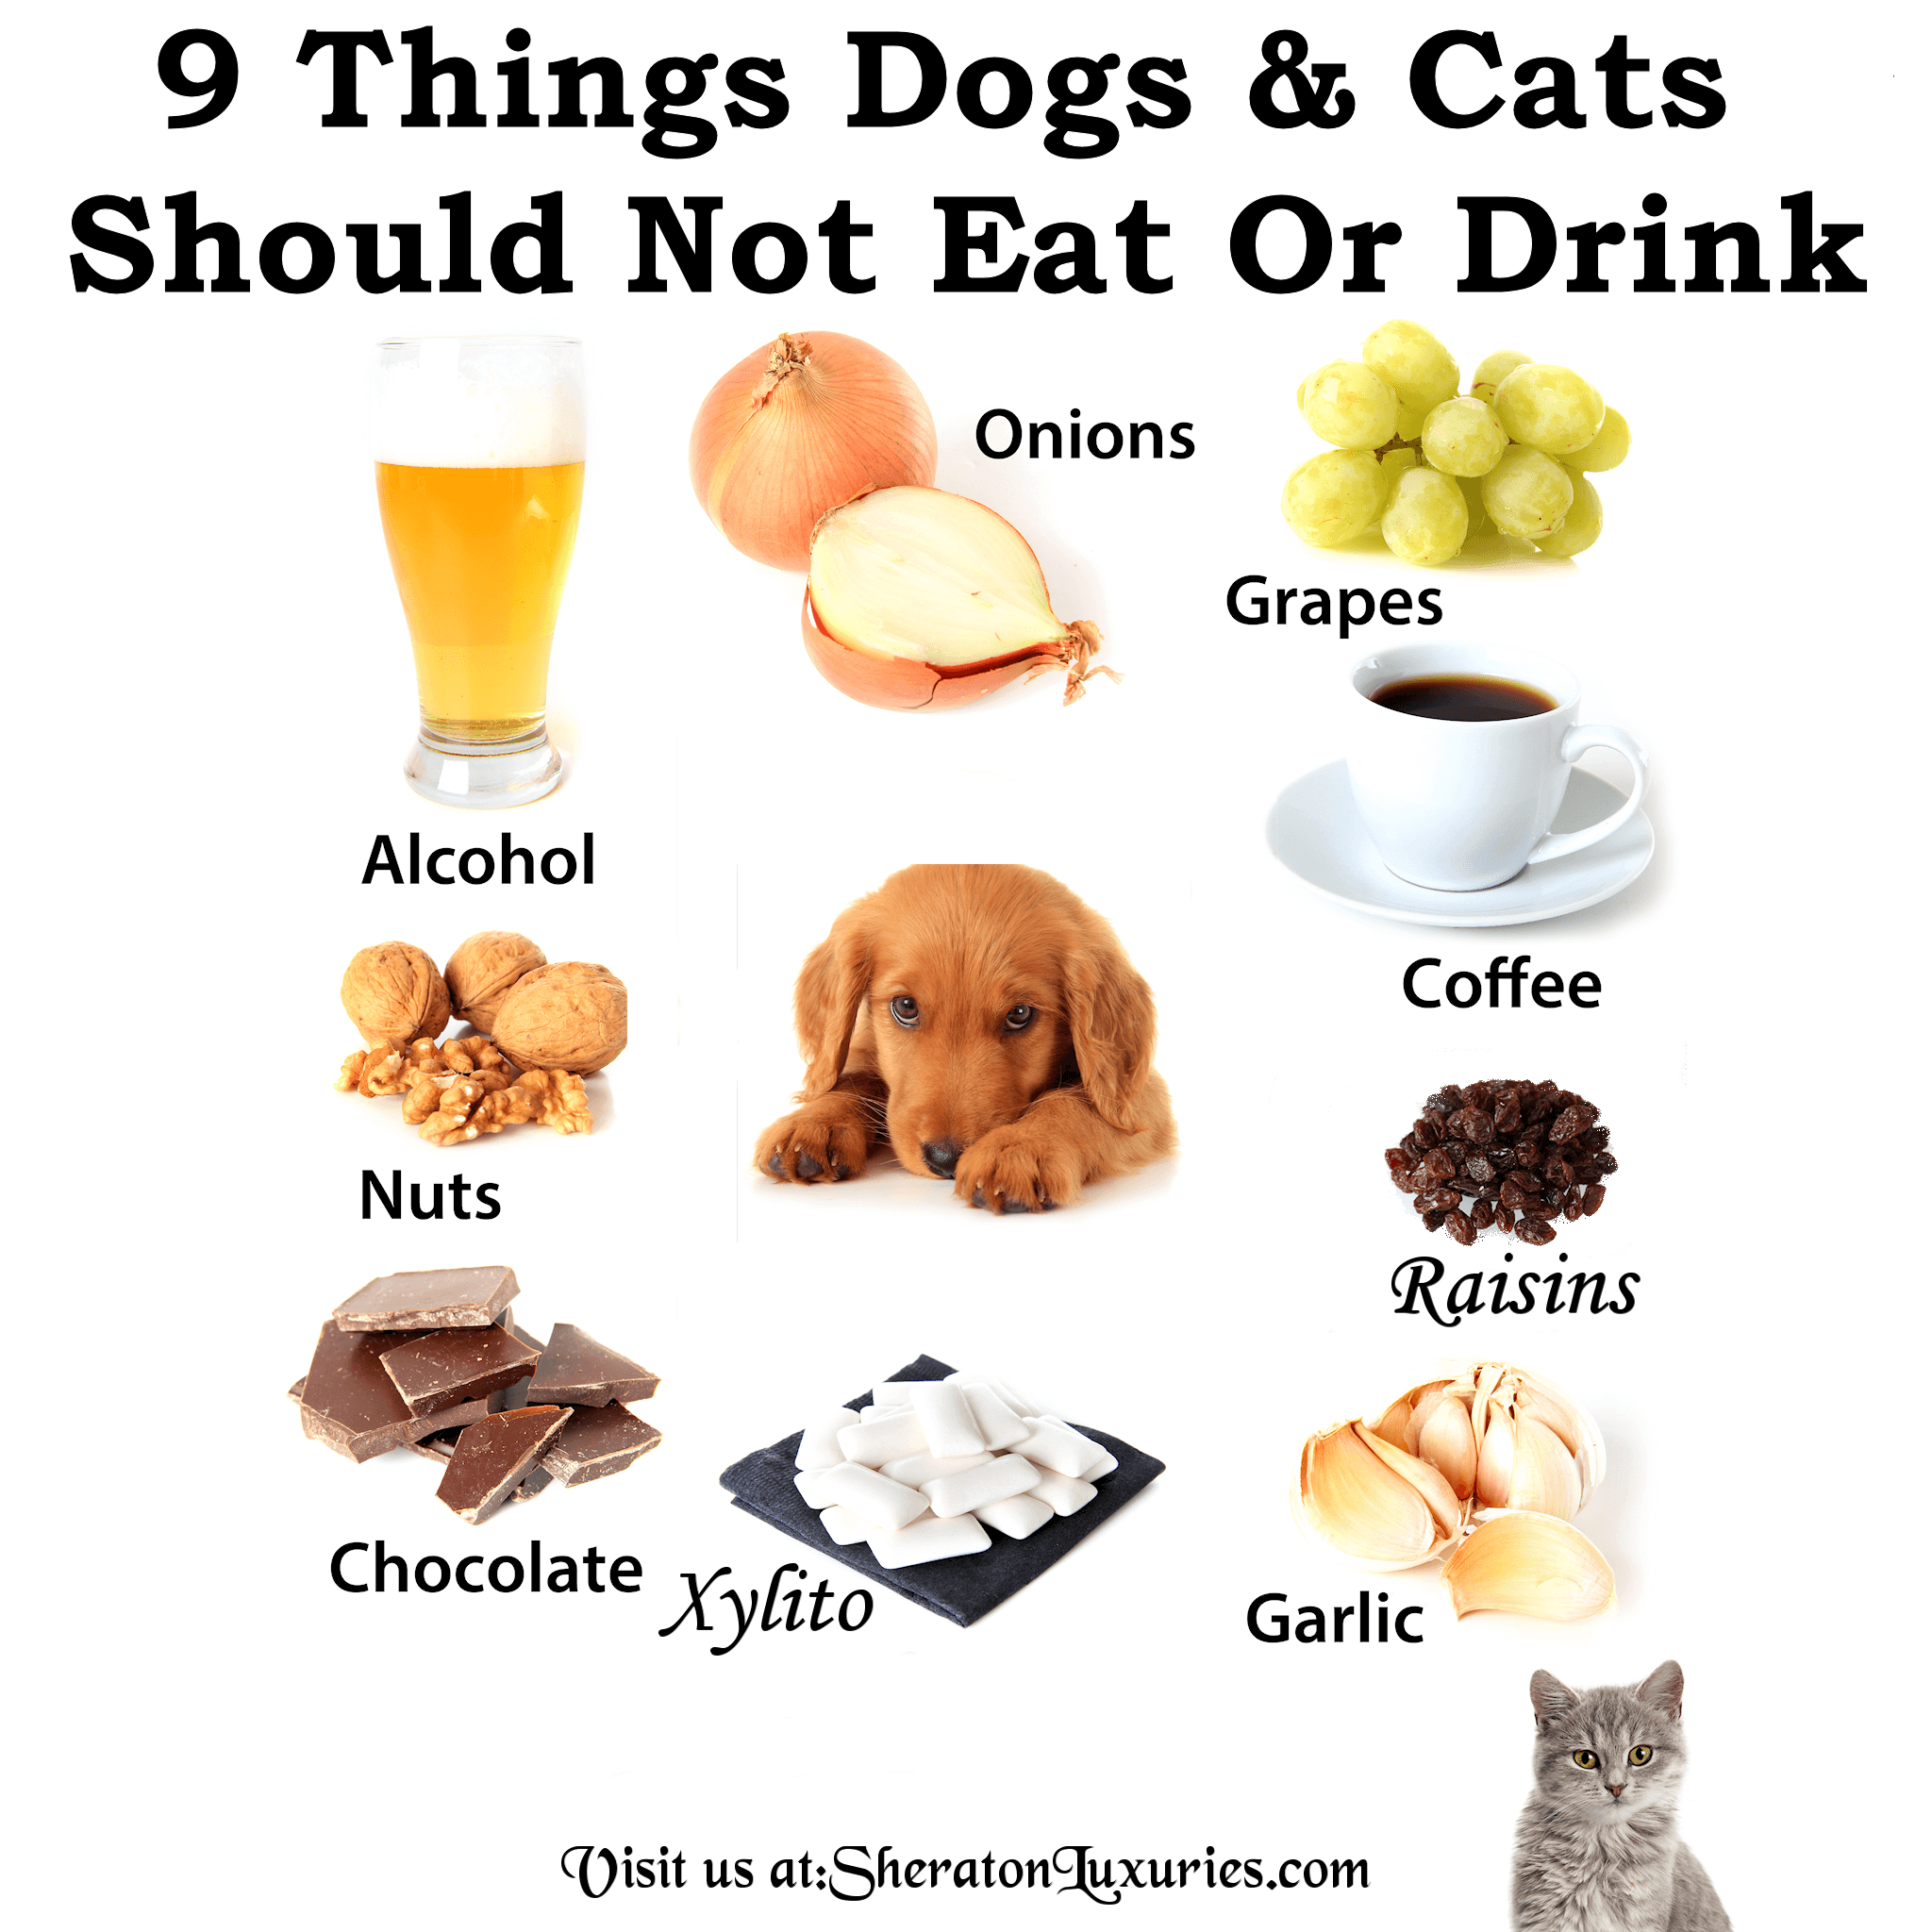 What Foods Can't Dogs And Cats Eat?